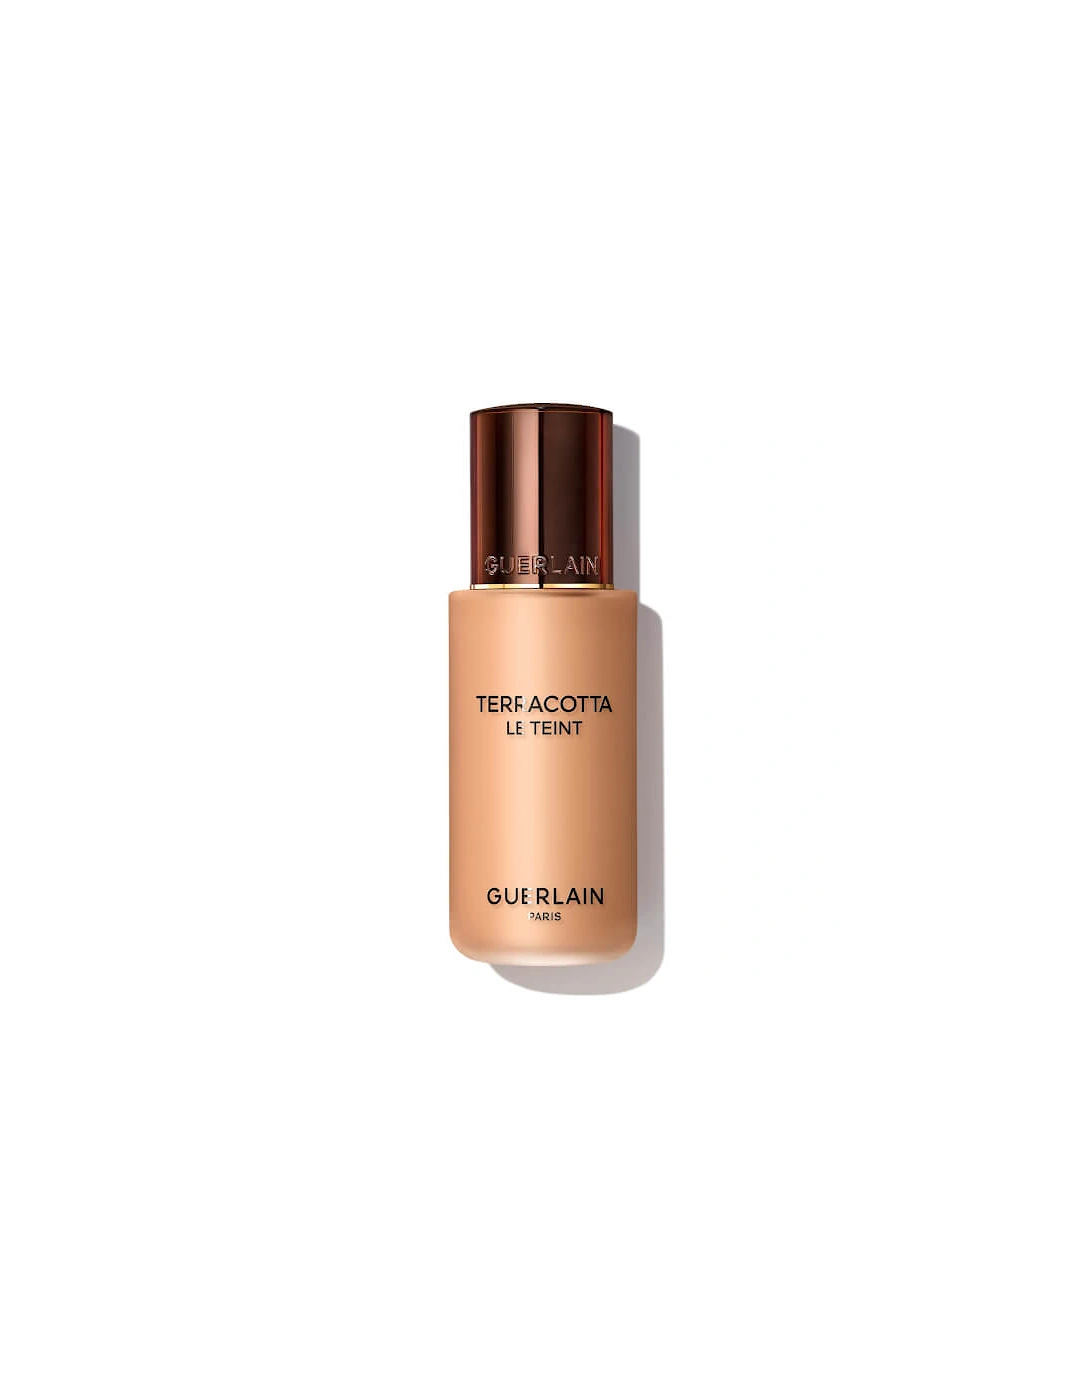 Terracotta Le Teint Healthy Glow Natural Perfection Foundation - 4.5N, 2 of 1